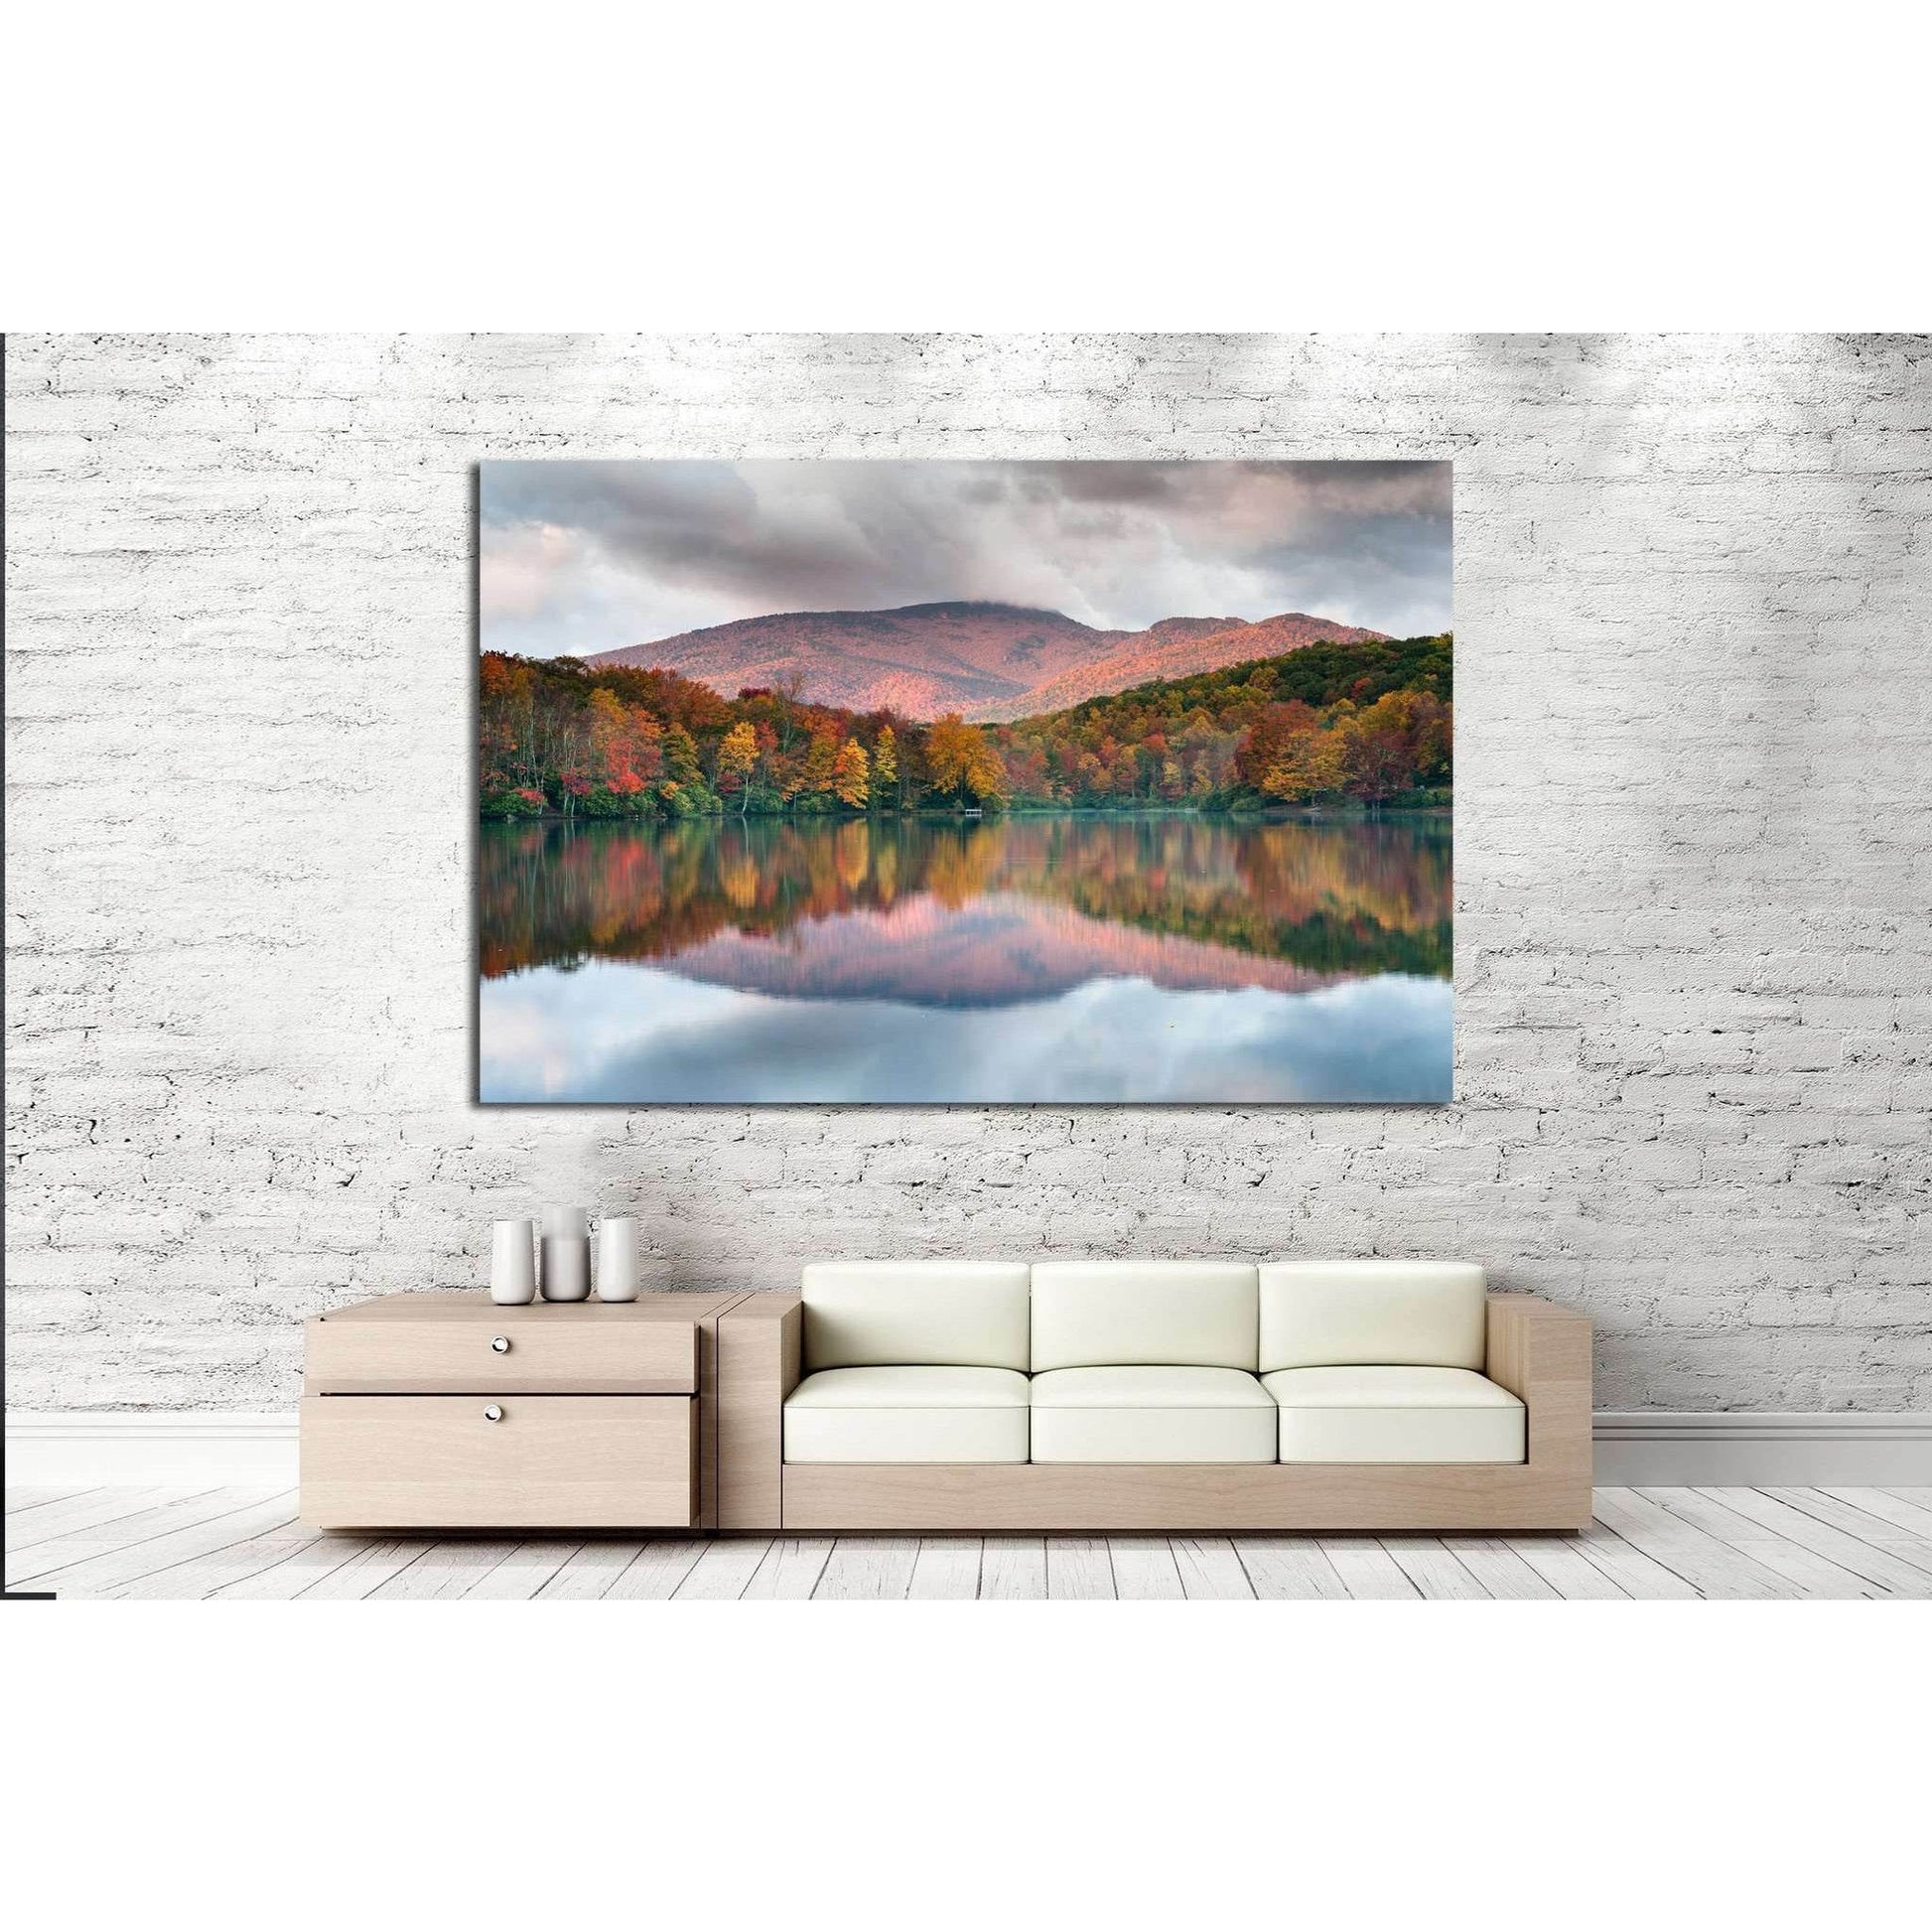 Blue Ridge Parkway Autumnal Mountain View Canvas Art for Modern OfficesThis canvas print depicts a peaceful lake reflecting the fiery hues of autumn trees and the soft purple of the mountain backdrop. The mirrored colors in the water create a sense of har